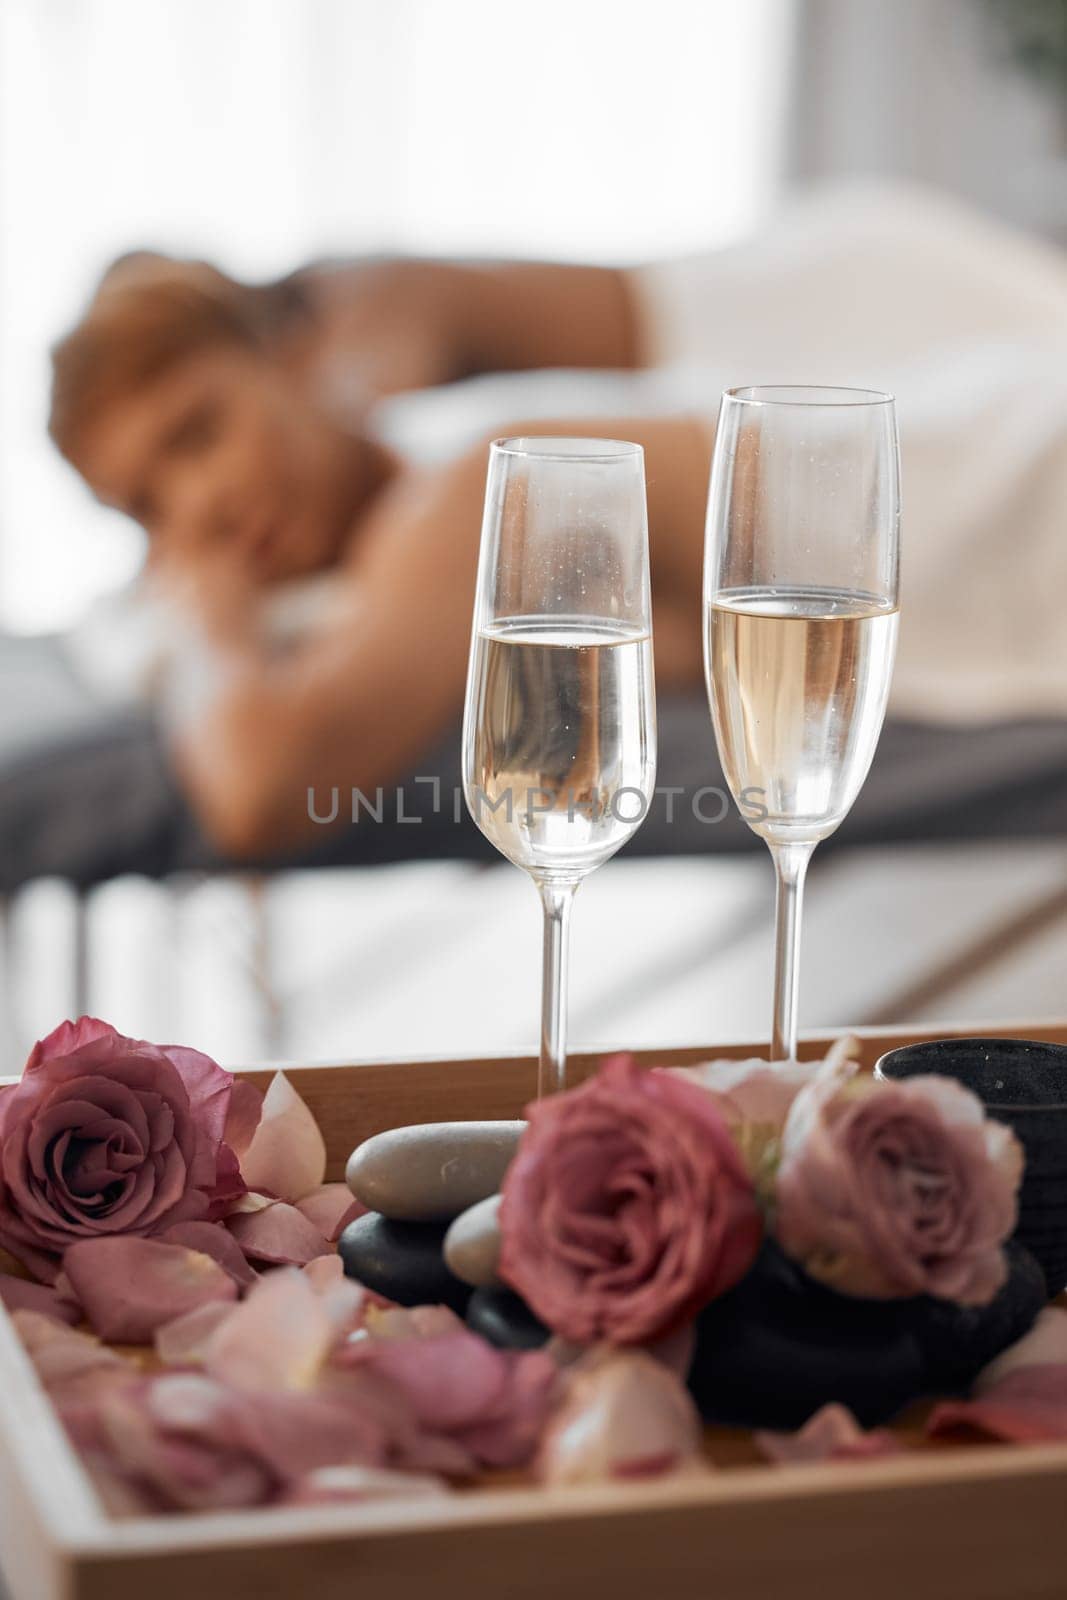 Champagne, massage and couple relax together for a anniversary, love and calm spa experience. Wellness, alcohol with flowers and luxury physical therapy activity of man and woman for romance and rest by YuriArcurs